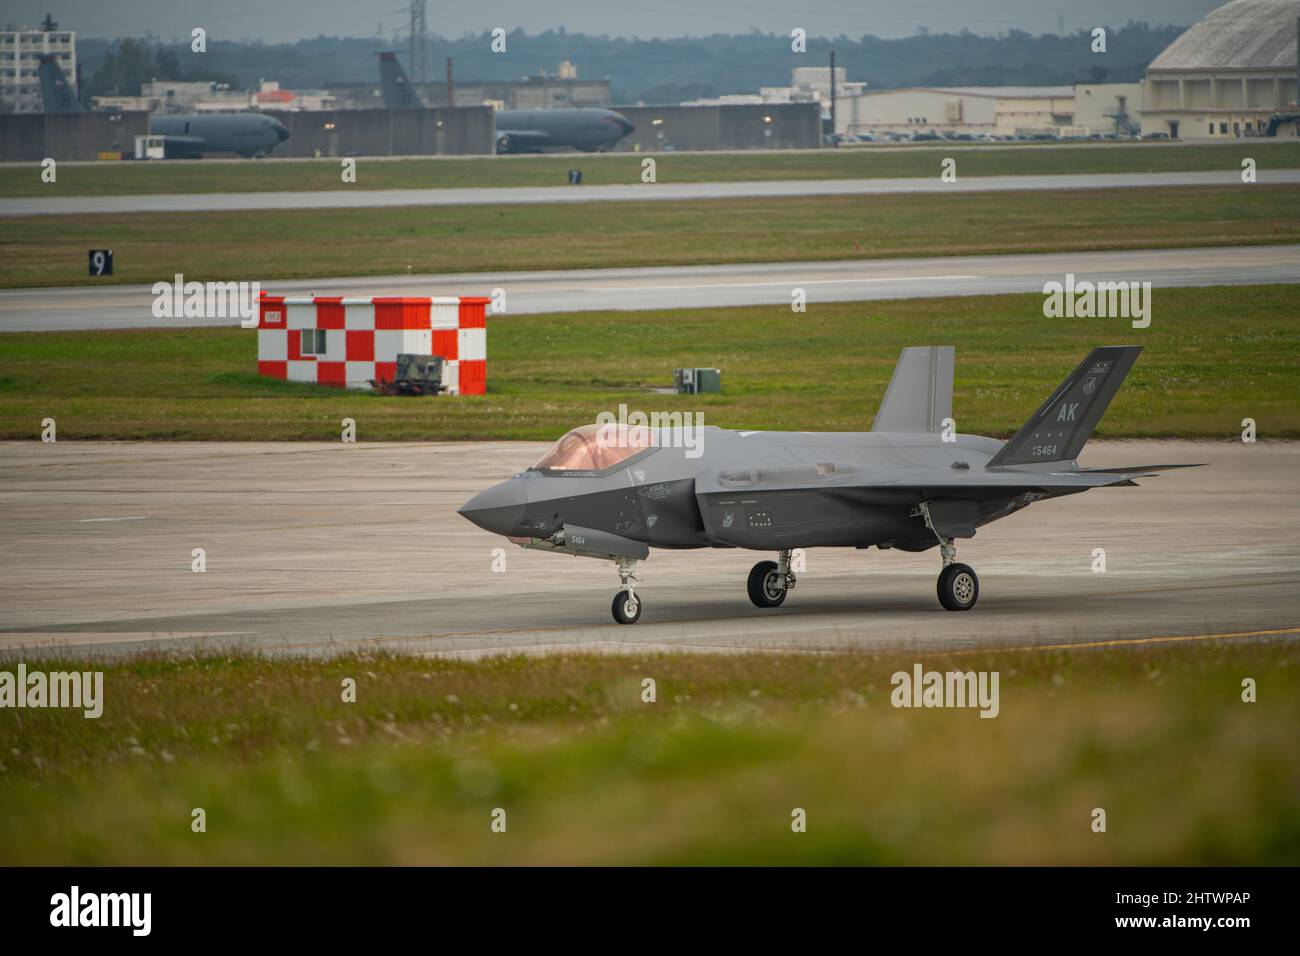 A U.S. Air Force F-35A Lightning II from Eielson Air Force Base, Alaska, taxis at Kadena Air Base, Japan, before take-off in support of integrated air operations, Feb. 21, 2022. Kadena Air Base regularly hosts transient aircraft in order to ensure a free and open Indo-Pacific region and to uphold obligations under the Treaty of Mutual Security and Cooperation between the United States and Japan. (U.S. Air Force photo by Senior Airman Stephen Pulter) Stock Photo